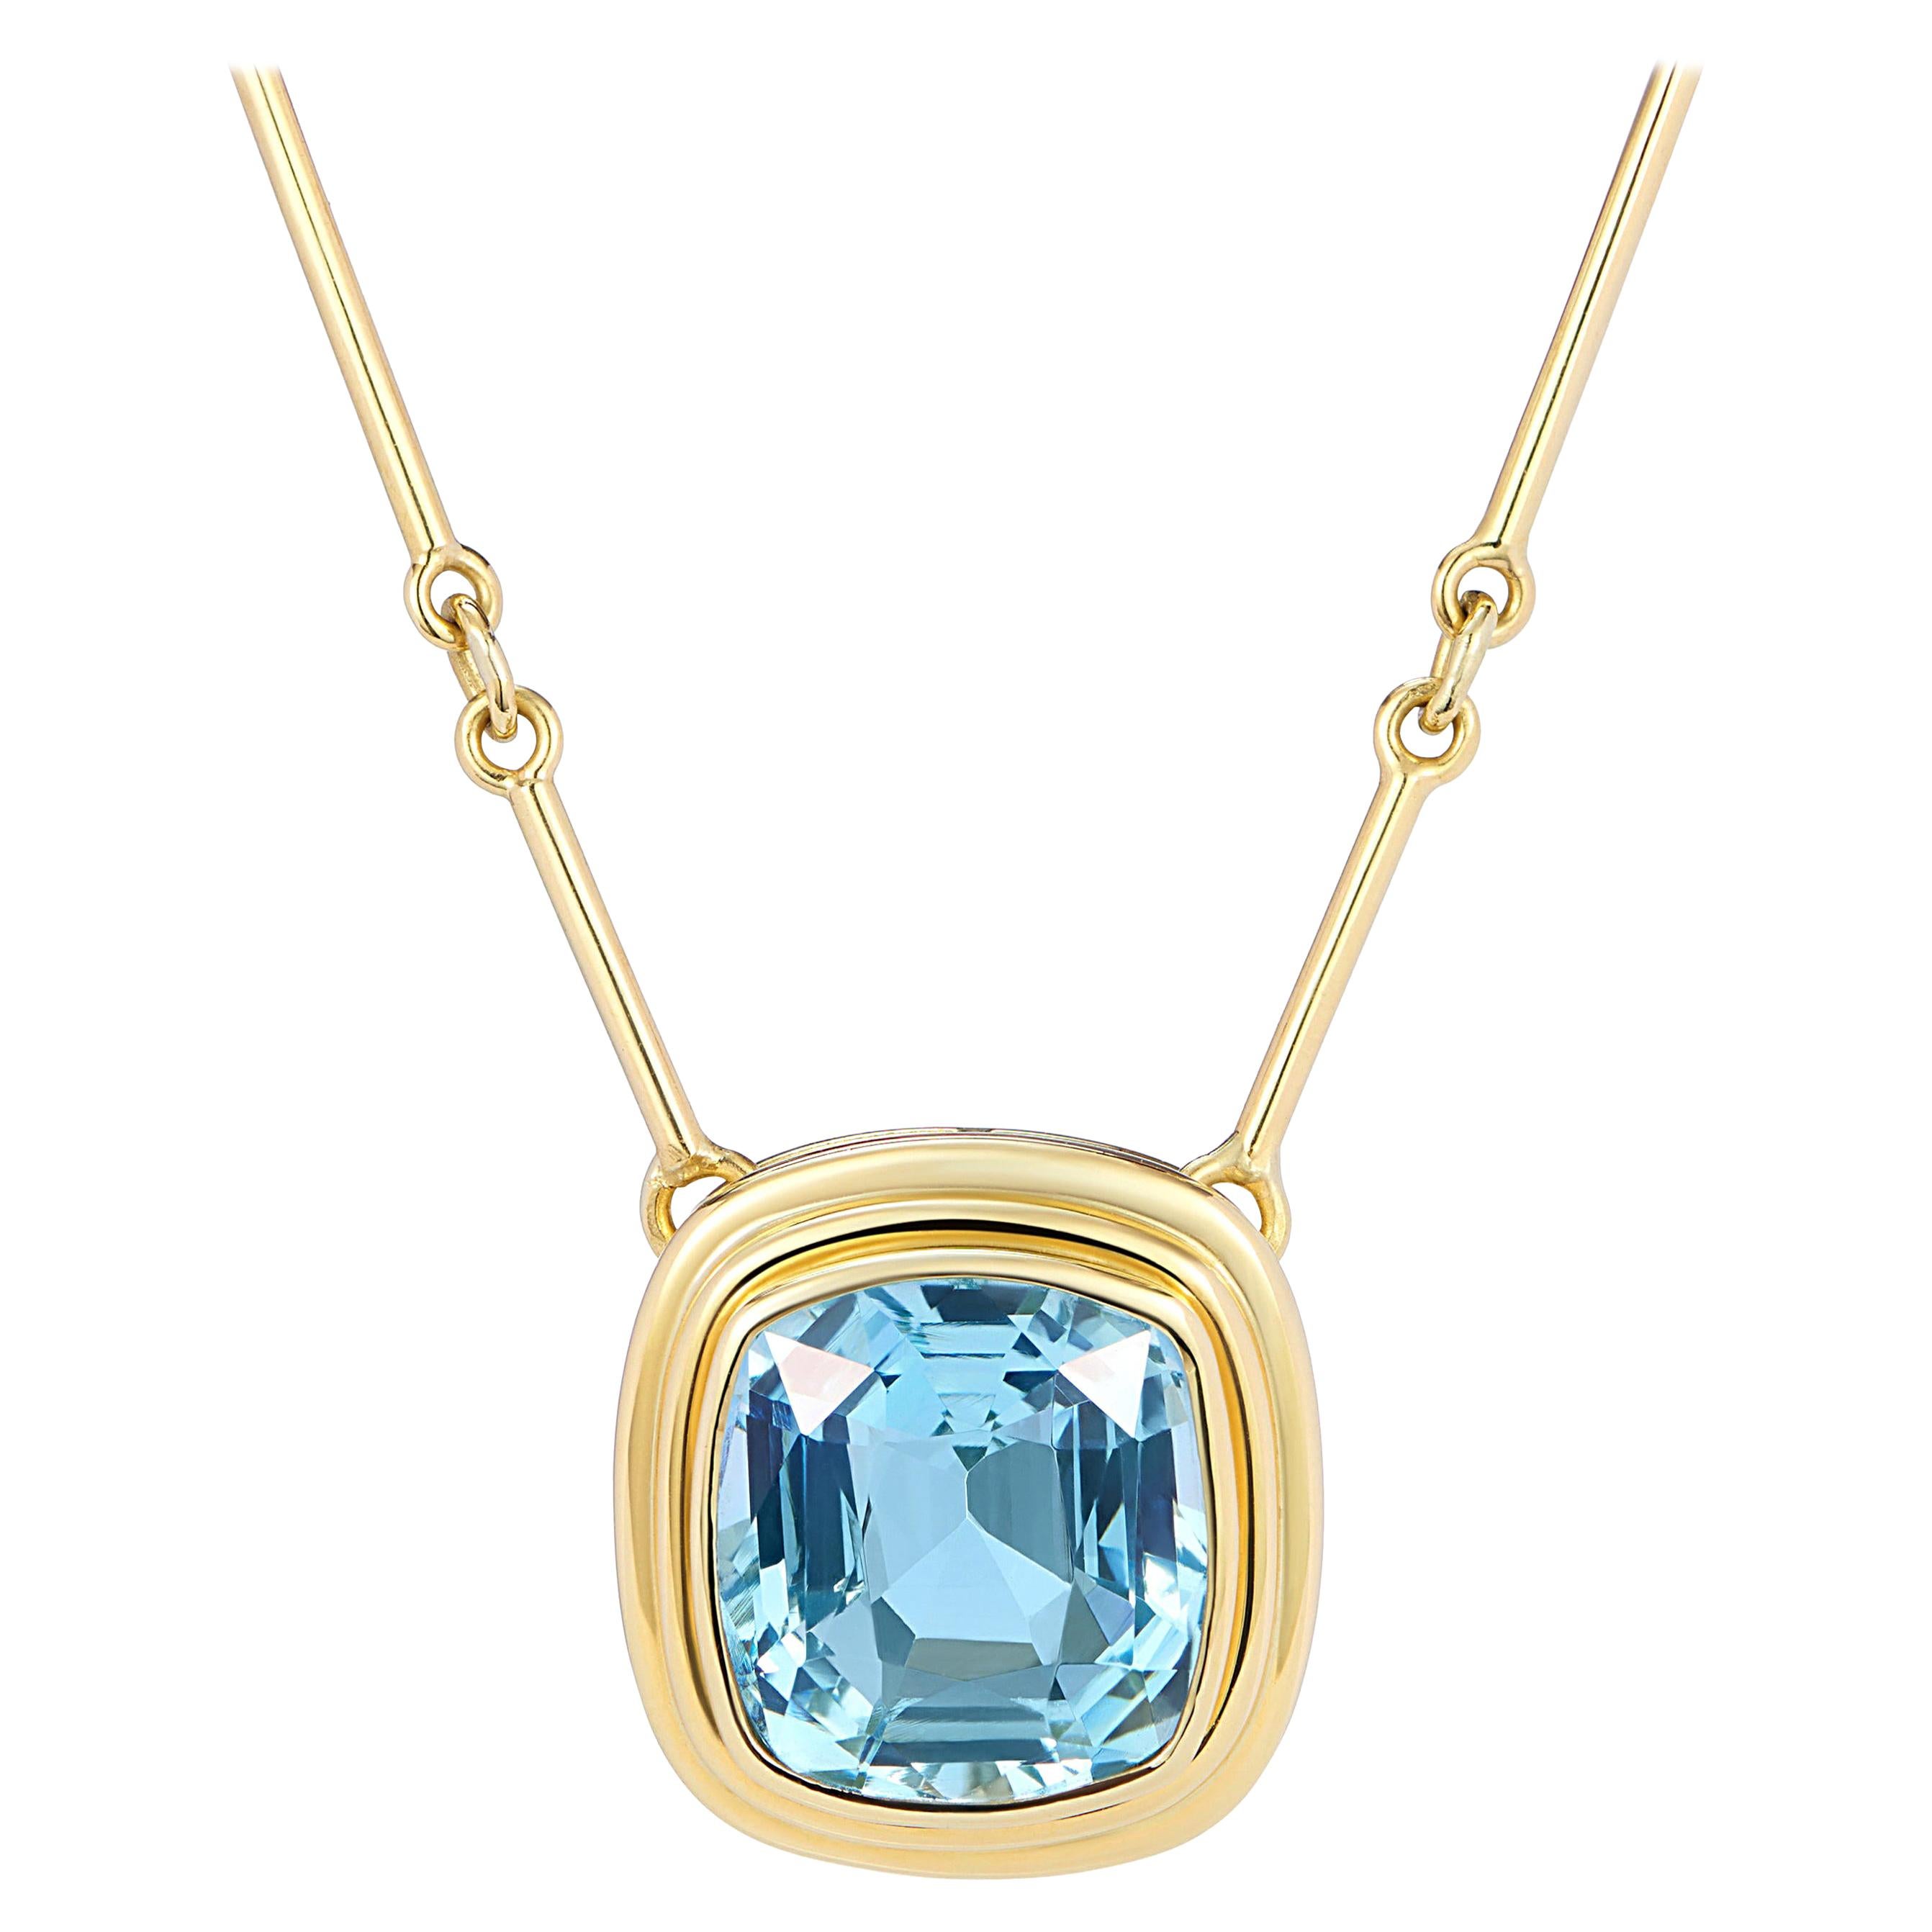 Certified 6.97 Carat Aquamarine Statement Necklace with 18 inch Gold Bar Chain For Sale